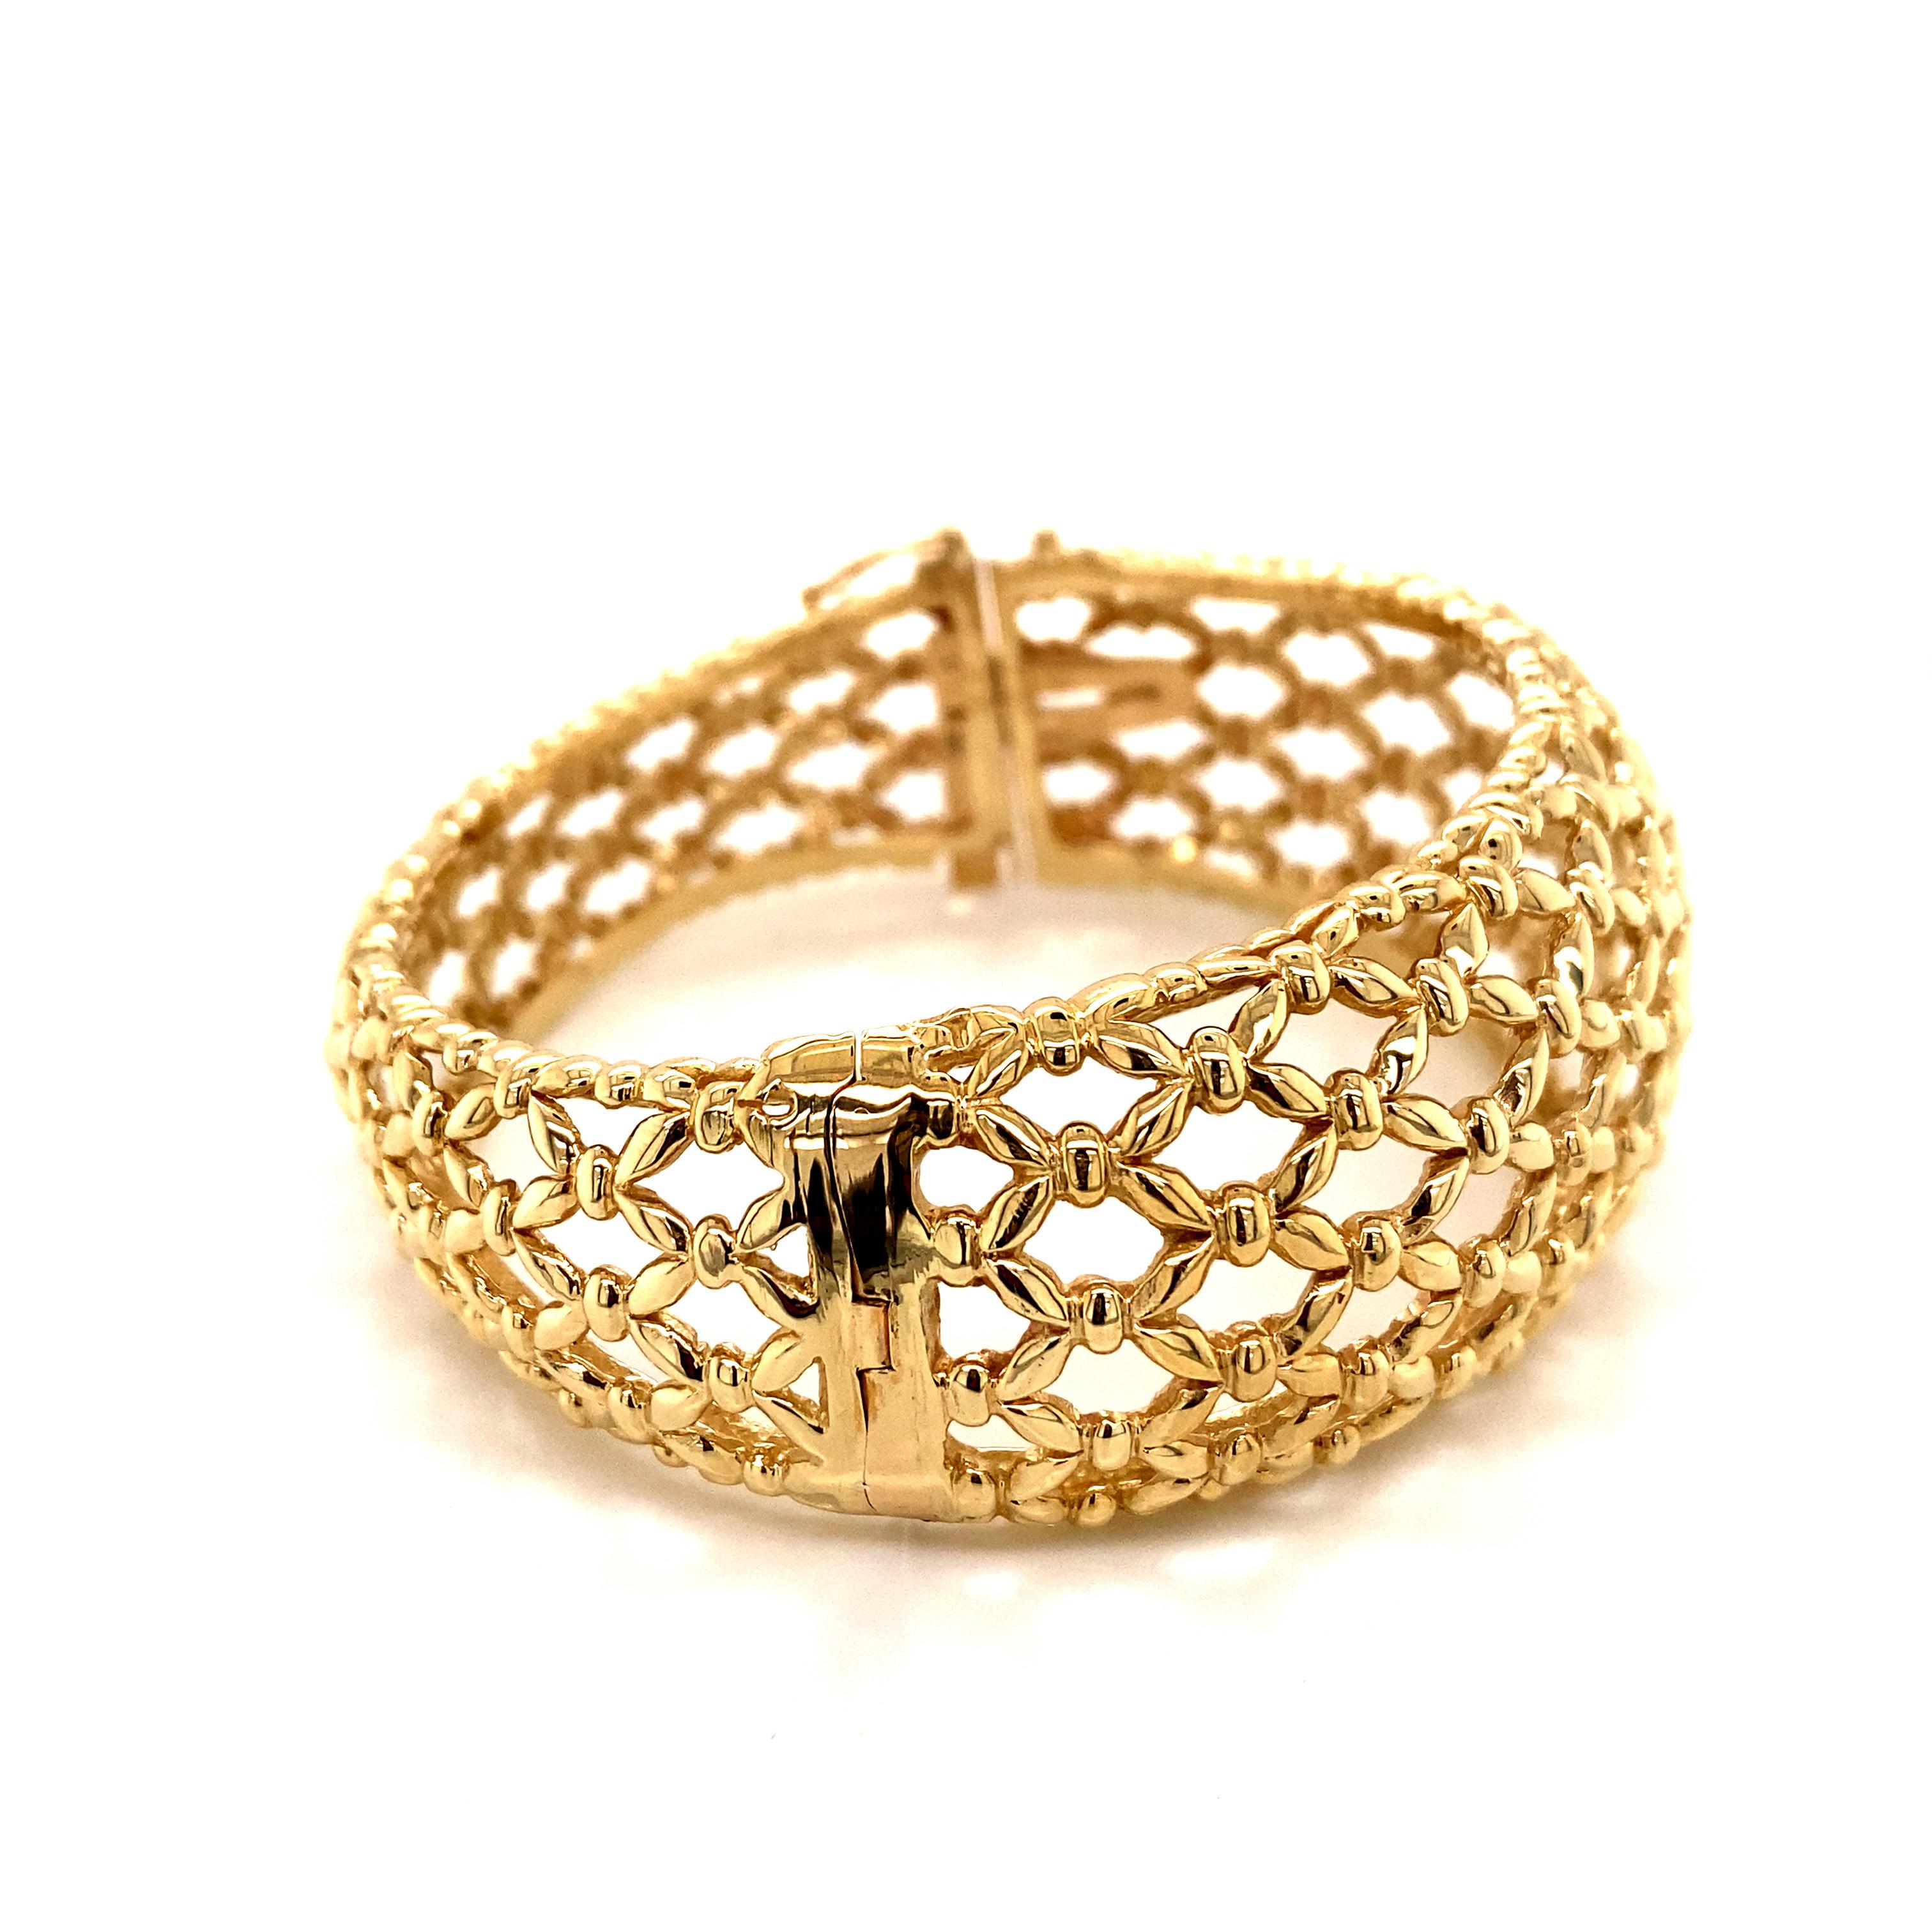 Vintage 1990’s 14k Yellow Gold Basket Weave Design Bangle Bracelet In Good Condition For Sale In Boston, MA